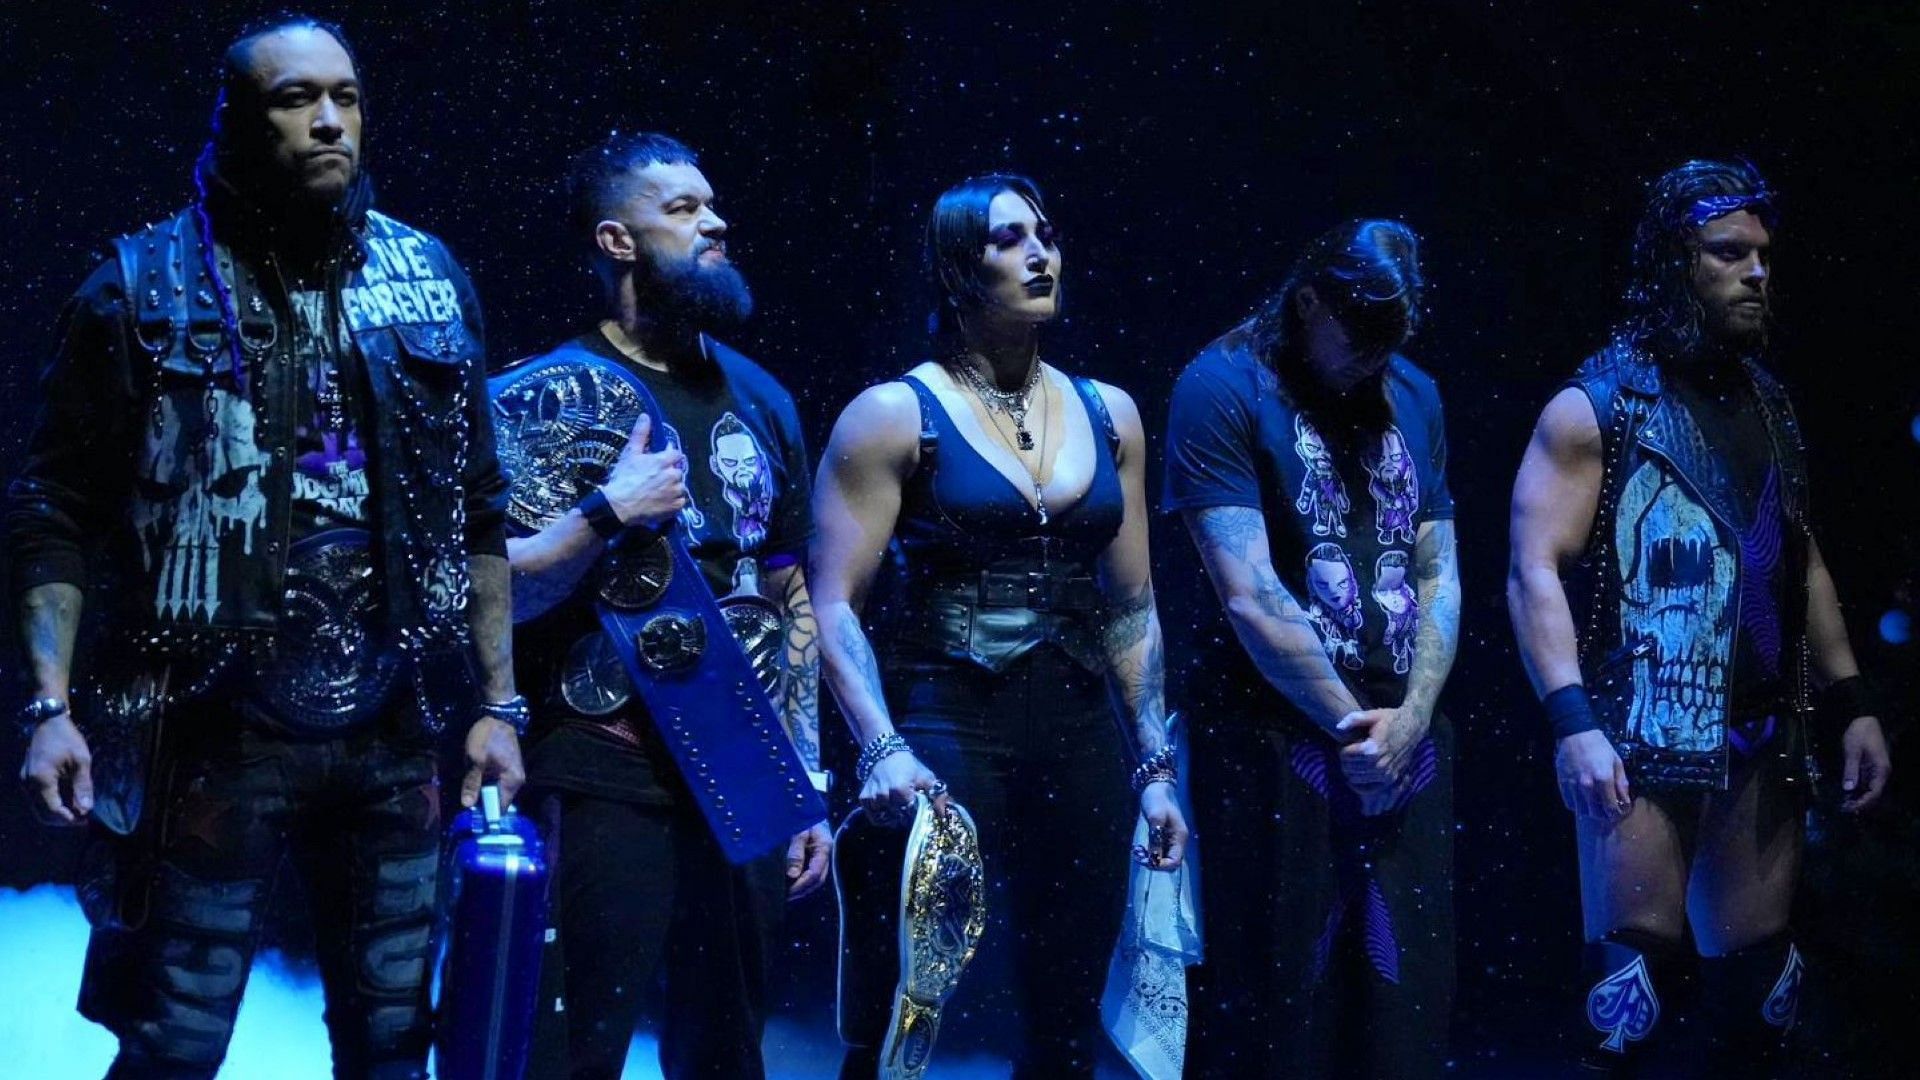 The Judgment Day stands tall together on WWE RAW [courtesy of WWE.com]